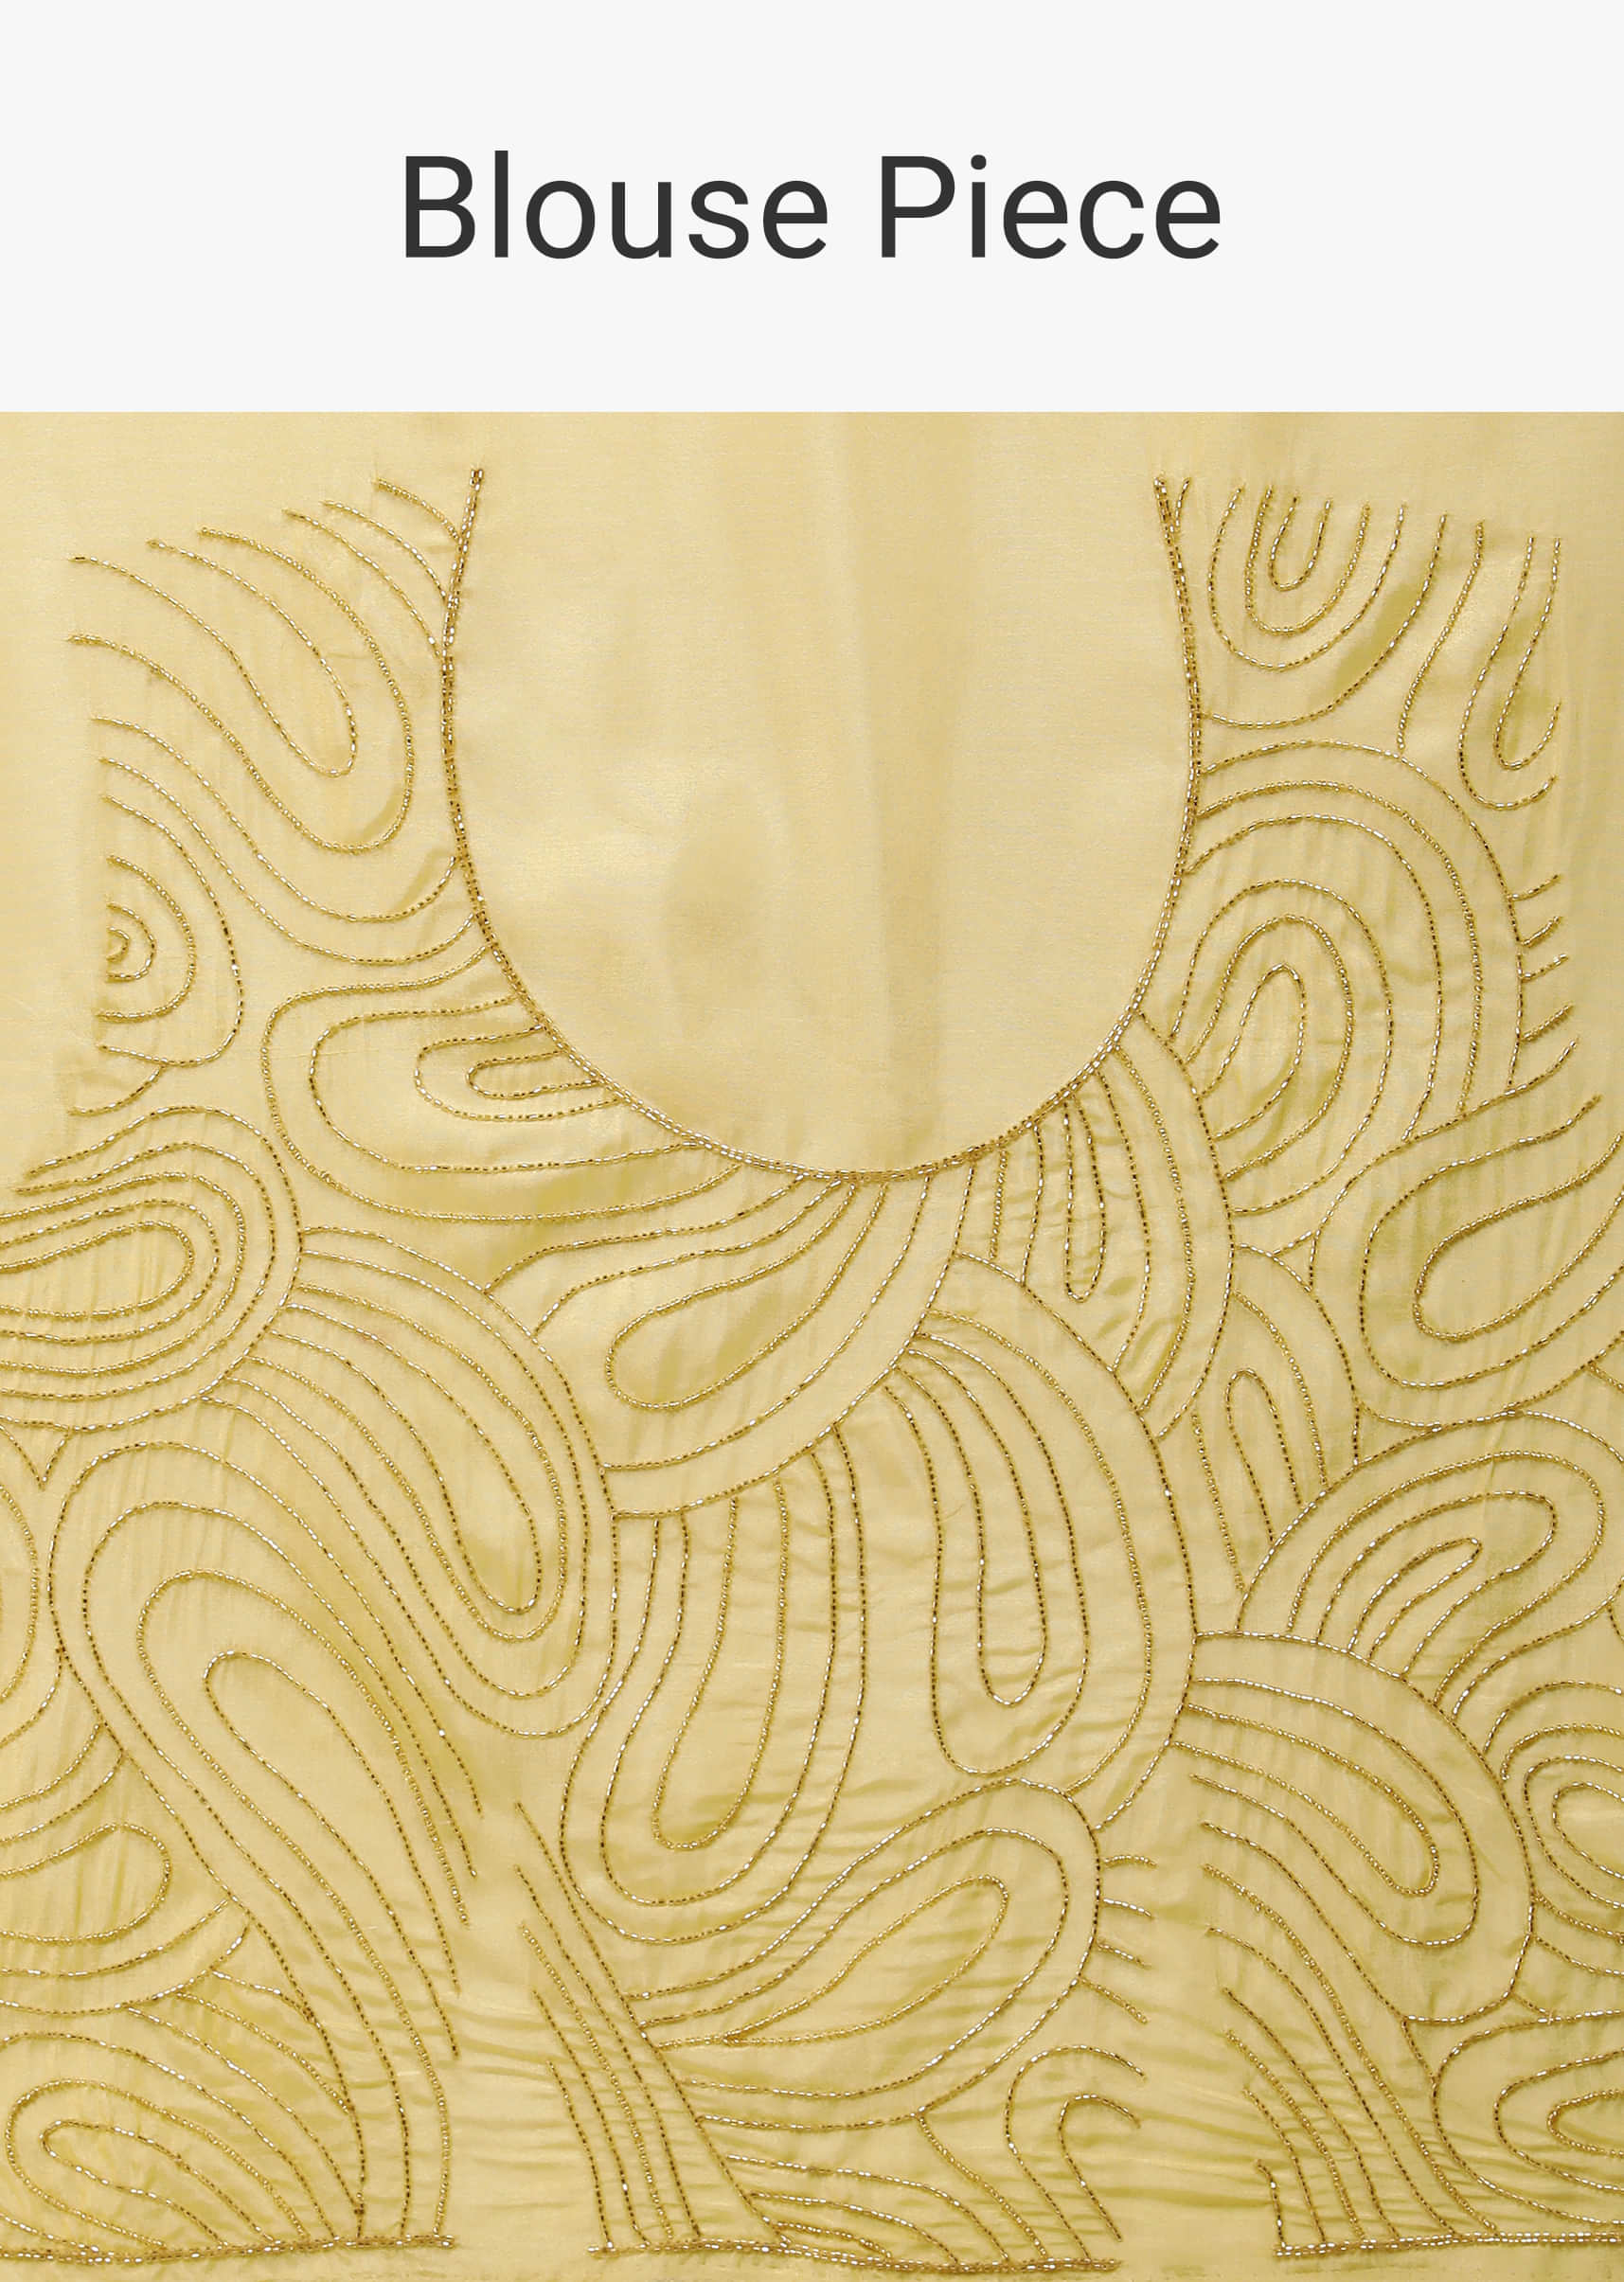 Popcorn Yellow Saree In Organza With Cut Dana Embroidered Scallop Cut Border And Moti Fringes On The Pallu  